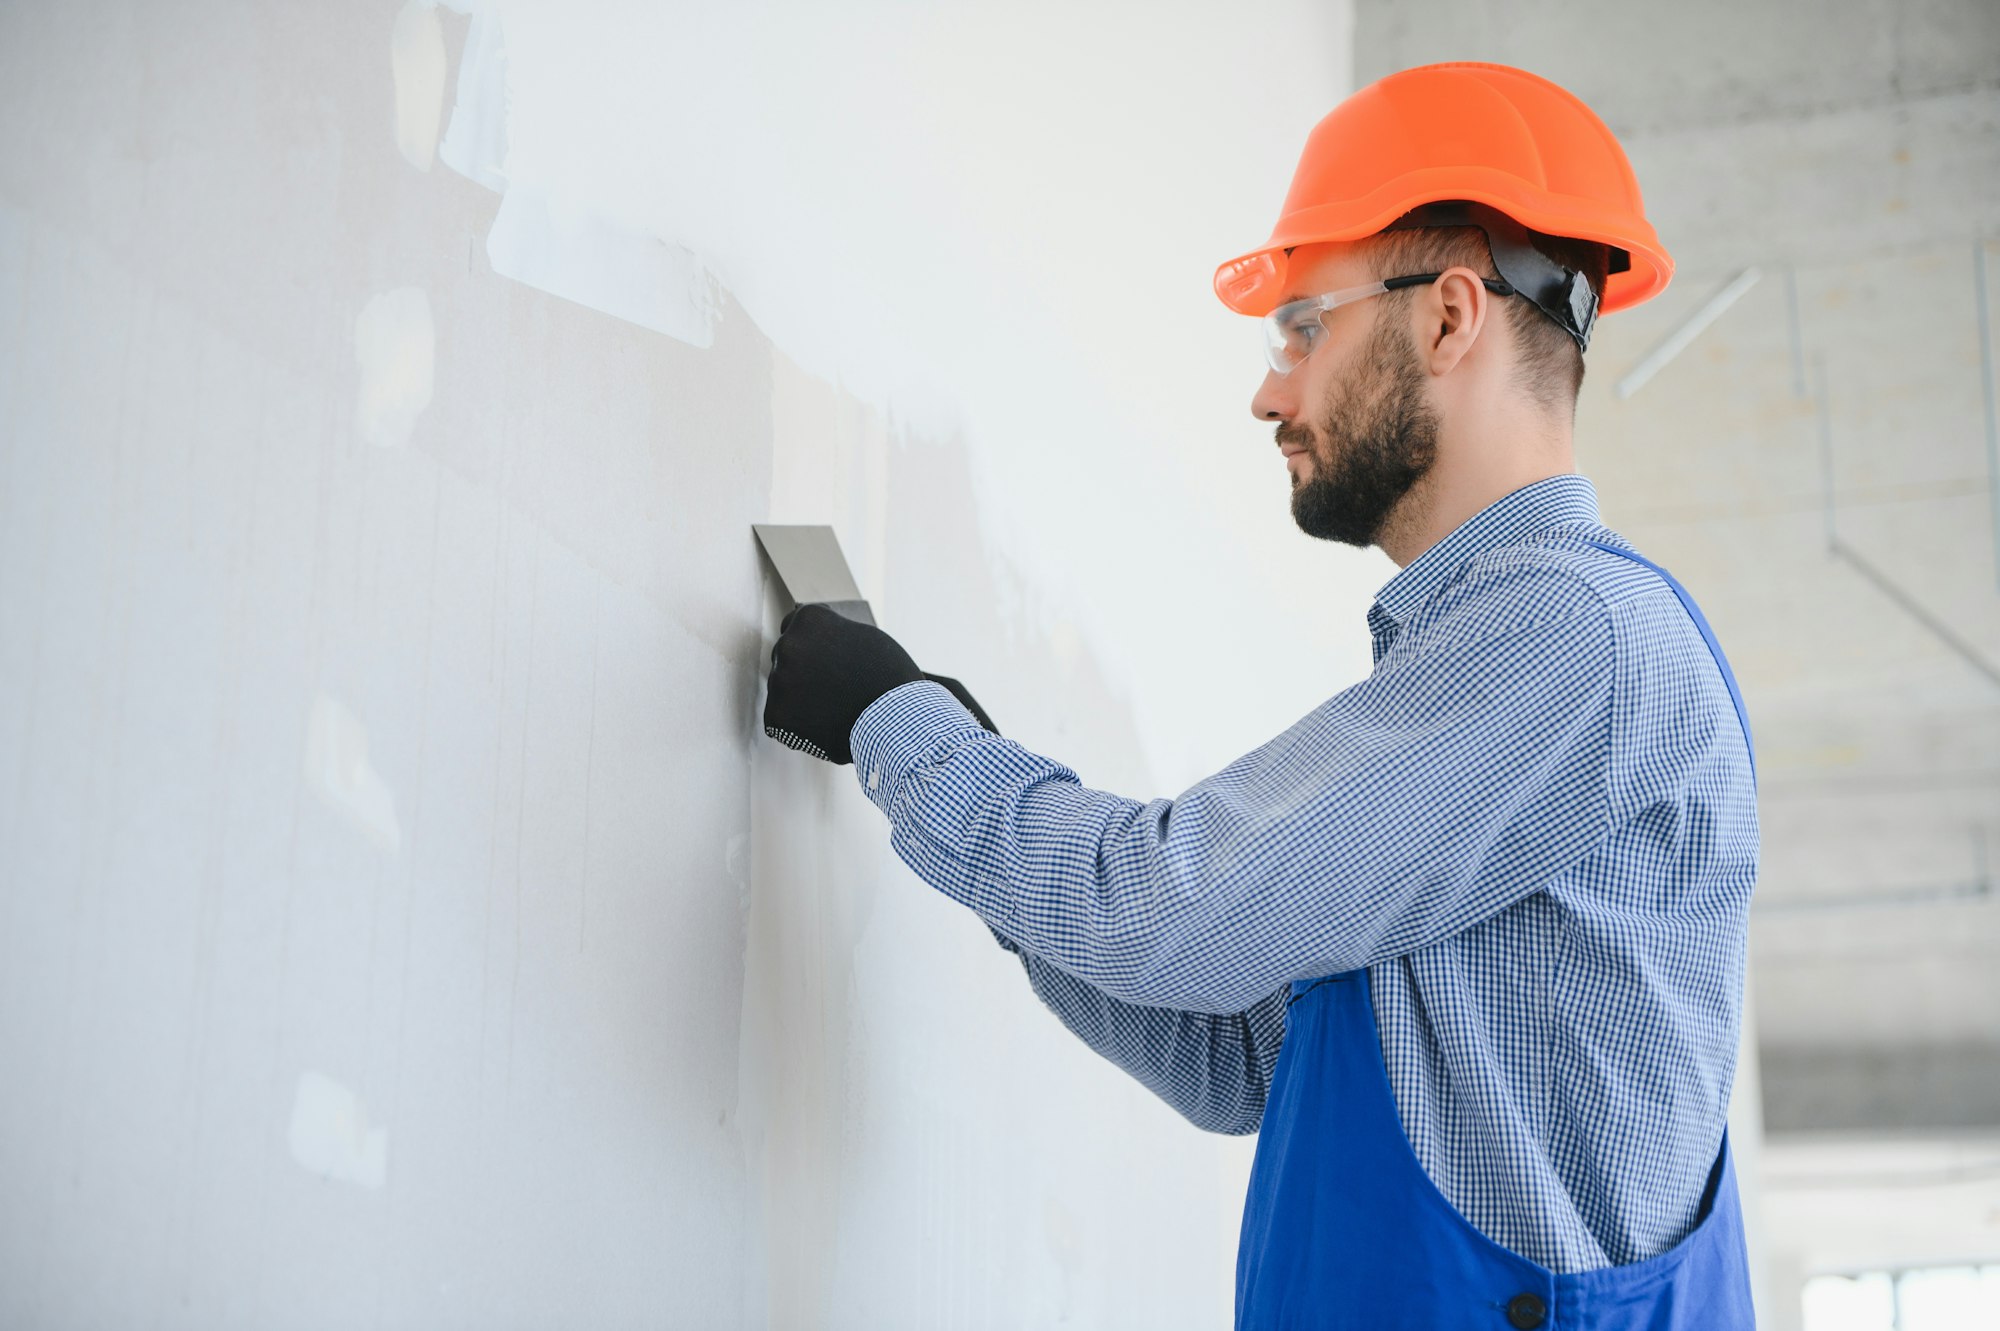 man drywall worker or plasterer sanding and smoothing a plasterboard walls